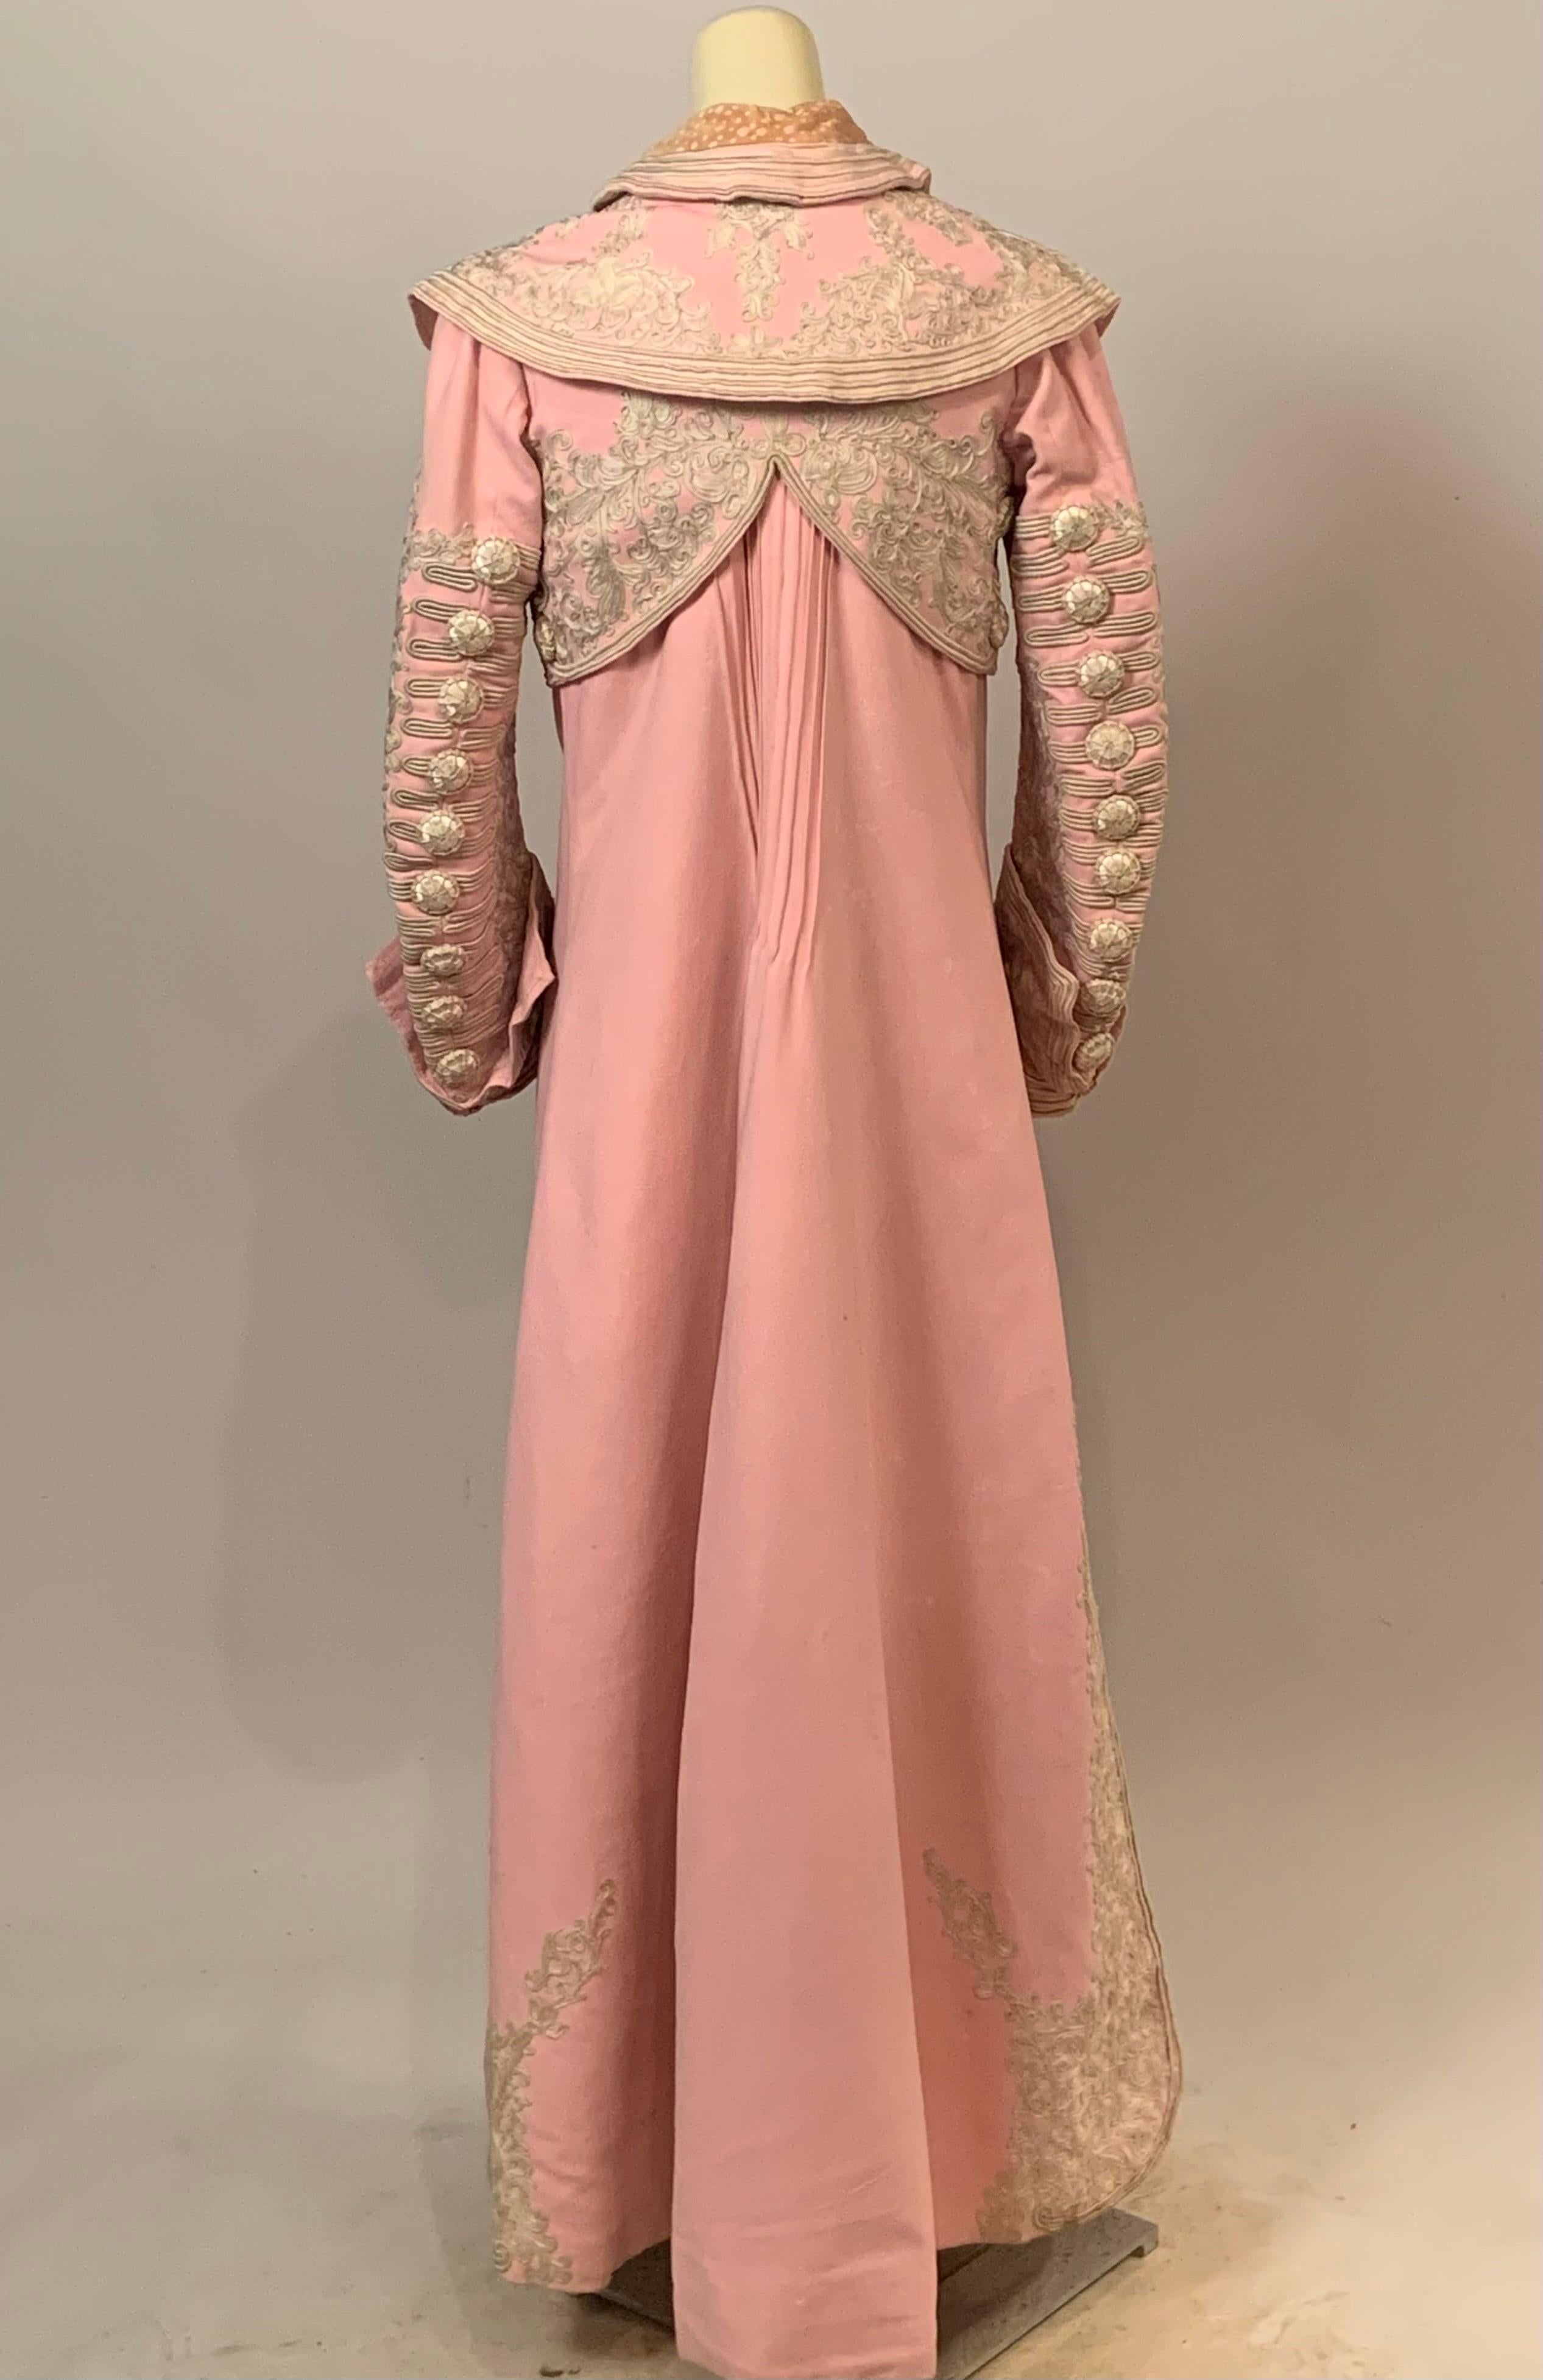 Bright Pink Wool Coat with Elaborate Ribbon Work and Button Trim Circa 1900 5